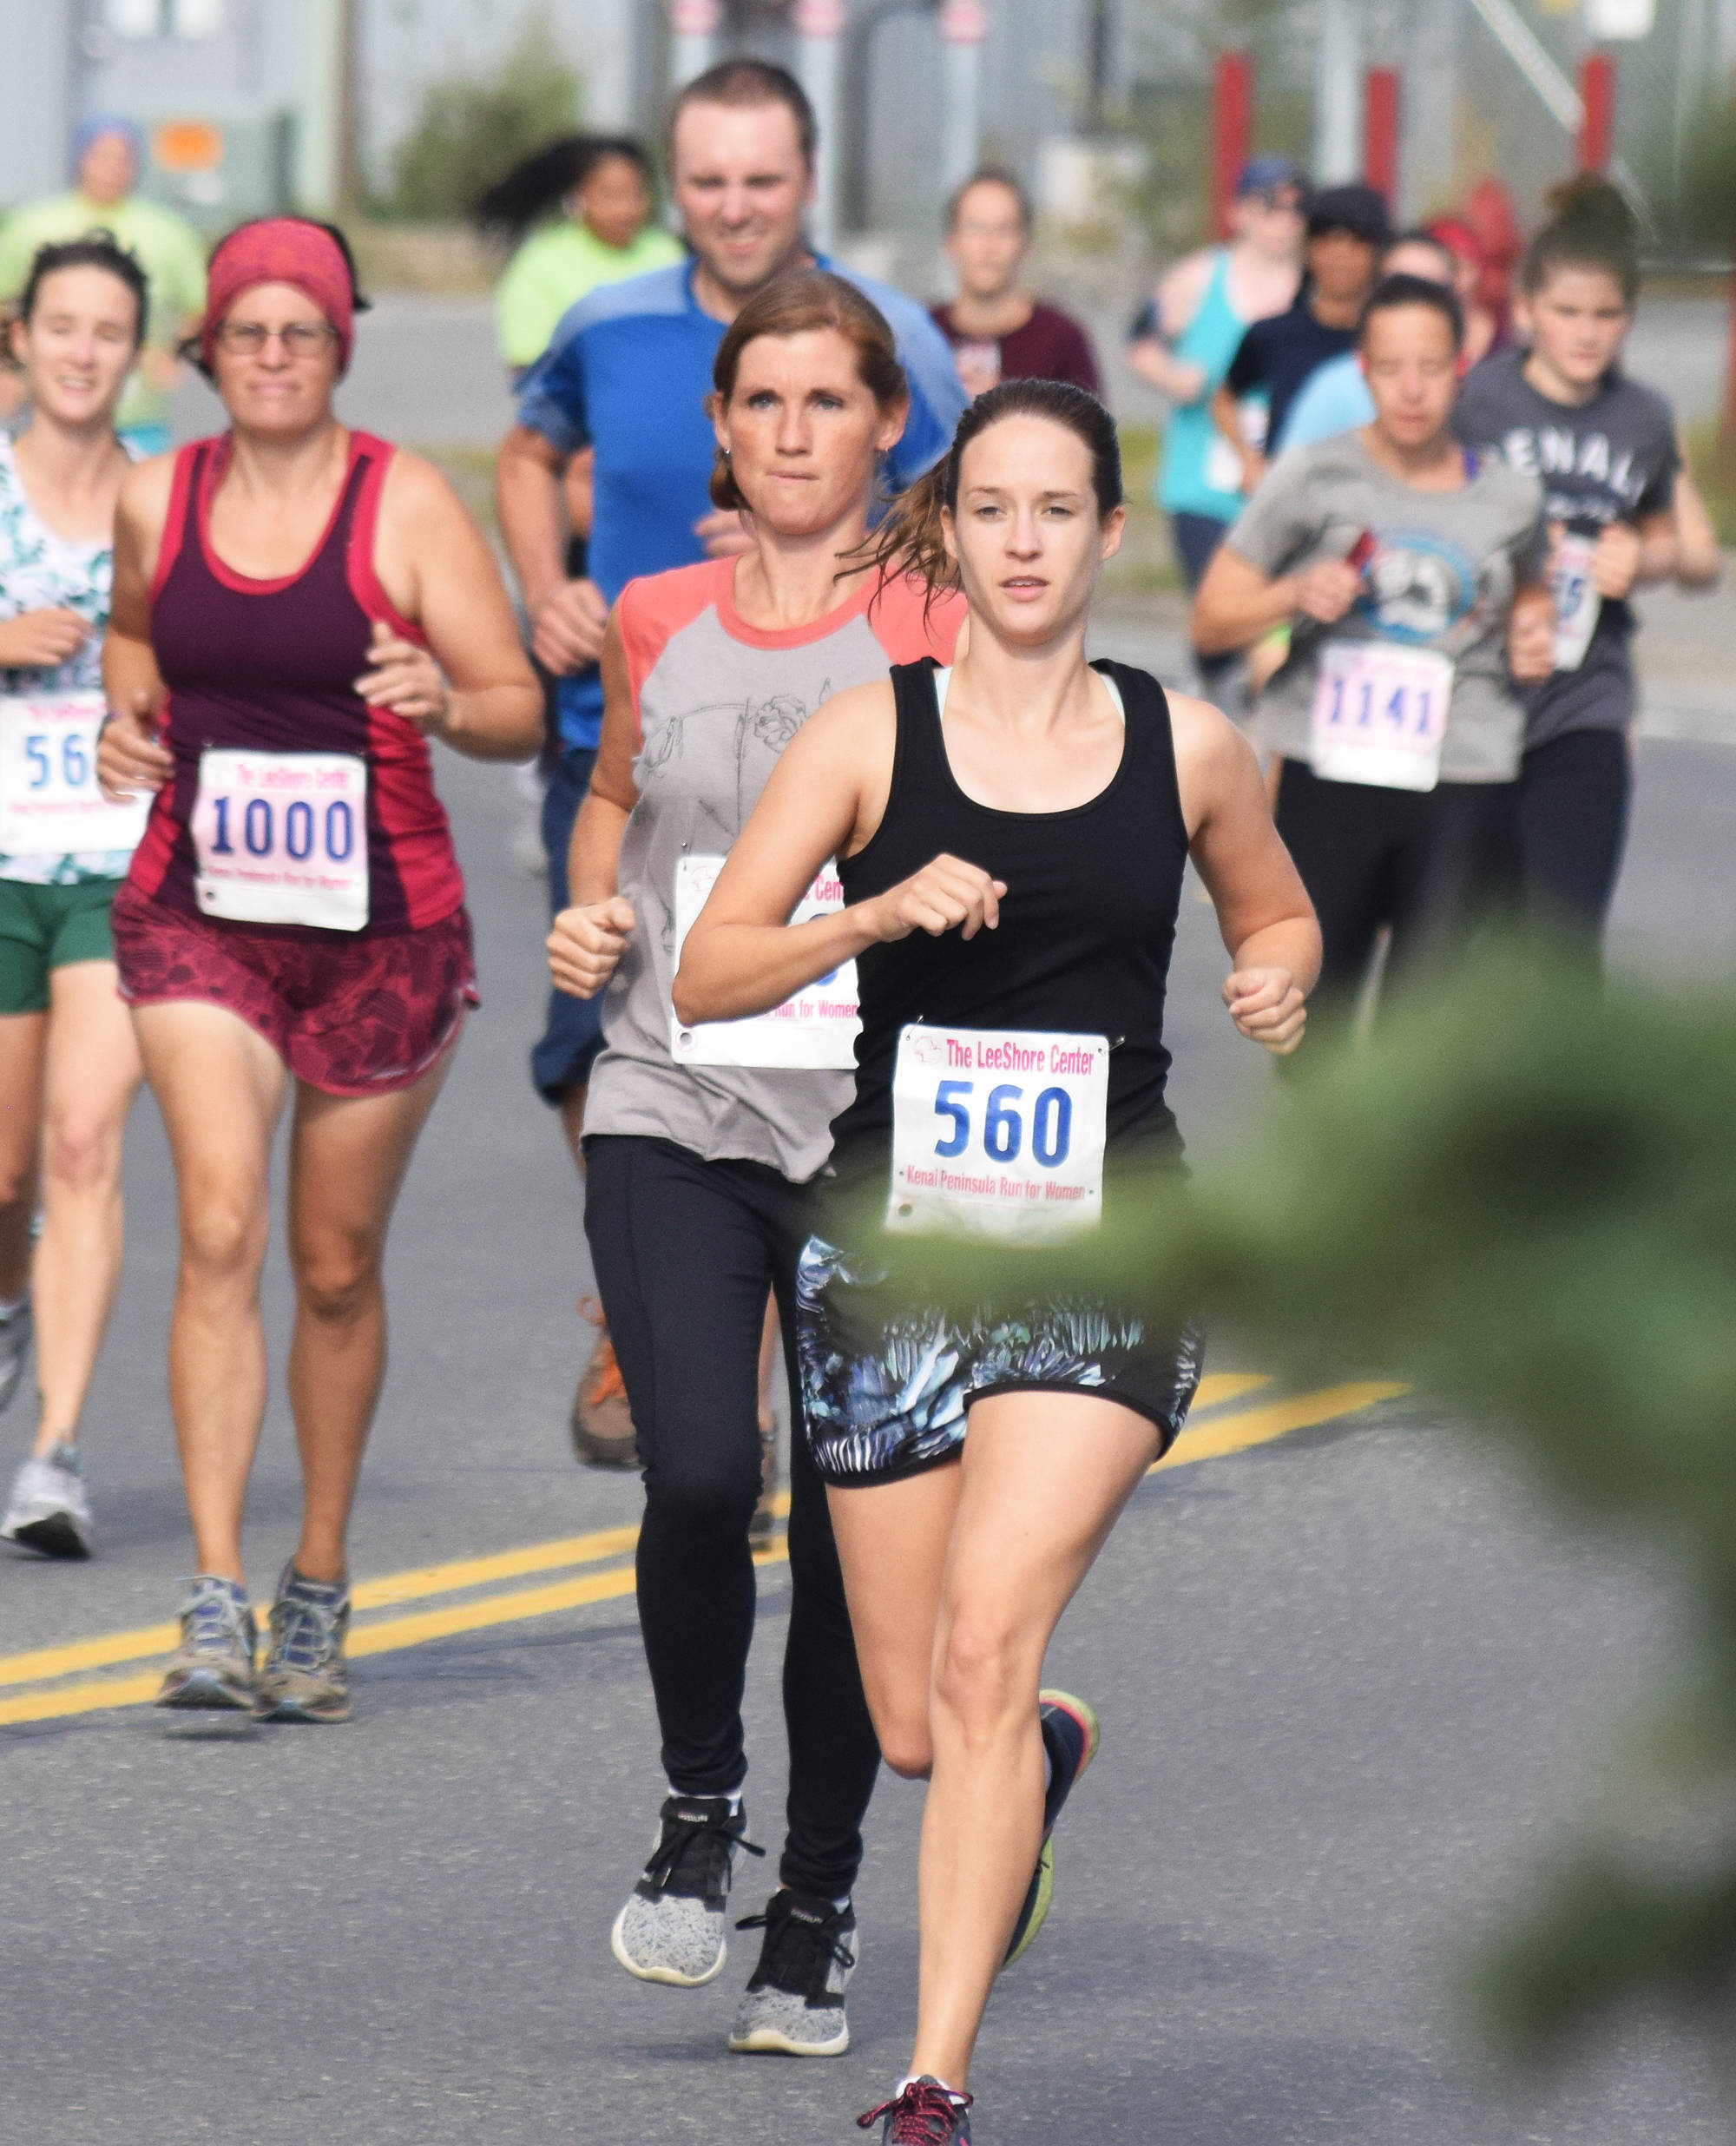 Women’s 5K winner Mallory Millay (560) bides her time early on Saturday, Aug. 10, 2019, at the 32nd annual Run for Women in Kenai, Alaska. (Photo by Joey Klecka/Peninsula Clarion)